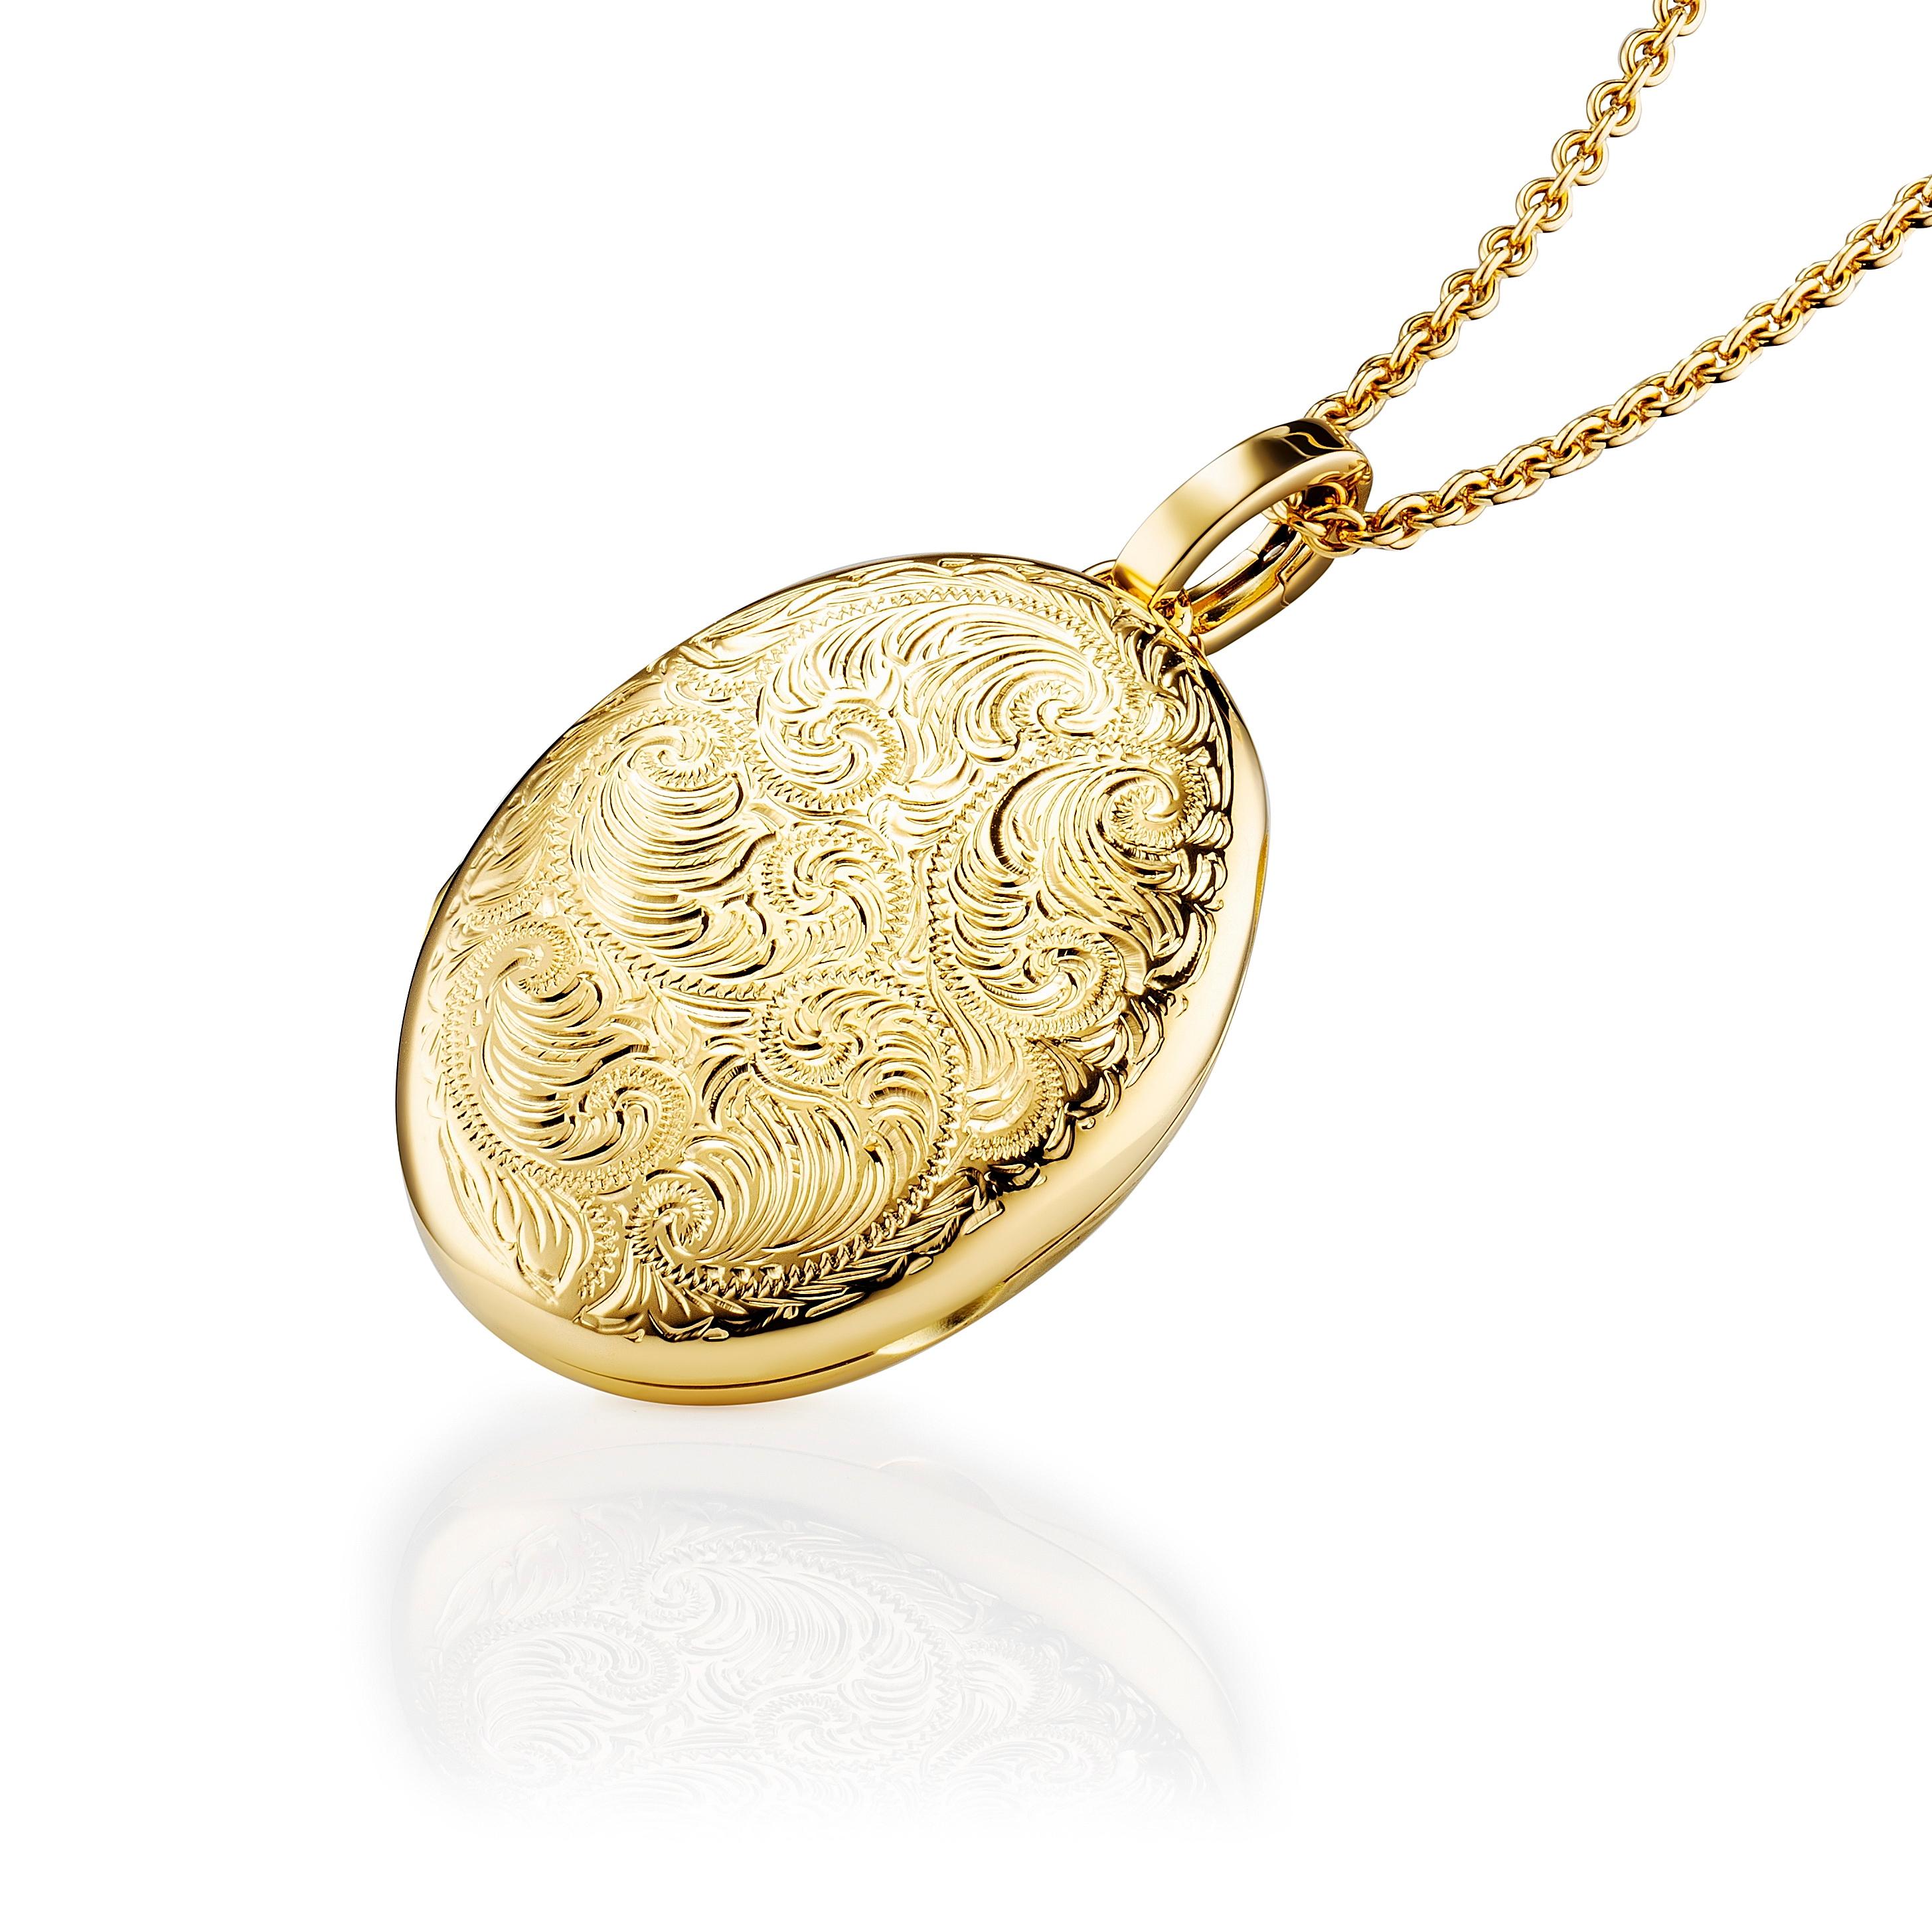 Victor Mayer oval locket pendant necklace, 18k yellow gold, Hallmark Collection, scroll engraving by hand, measurements app. 23.0 mm x 32.0 mm

About the creator Victor Mayer
Victor Mayer is internationally renowned for elegant timeless designs and